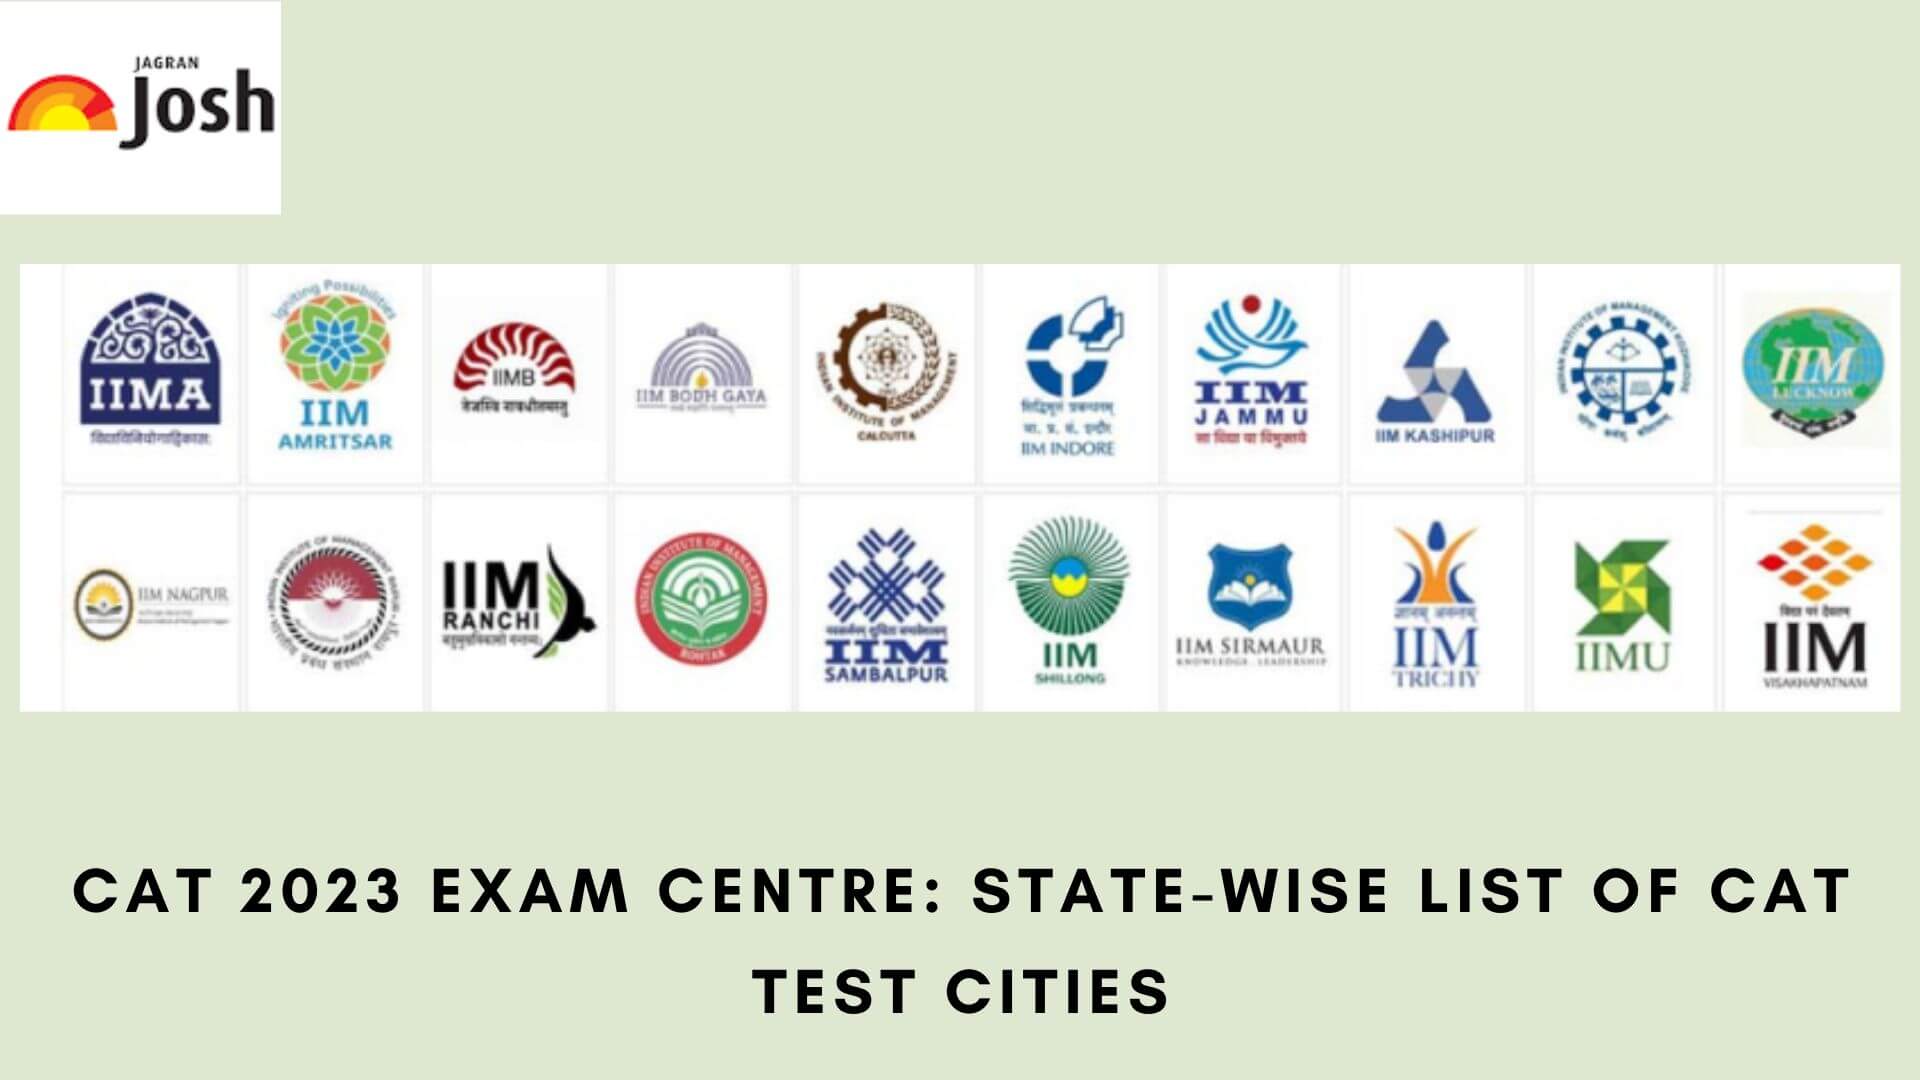 CAT 2023 Exam Centre Statewise List of CAT Test Cities